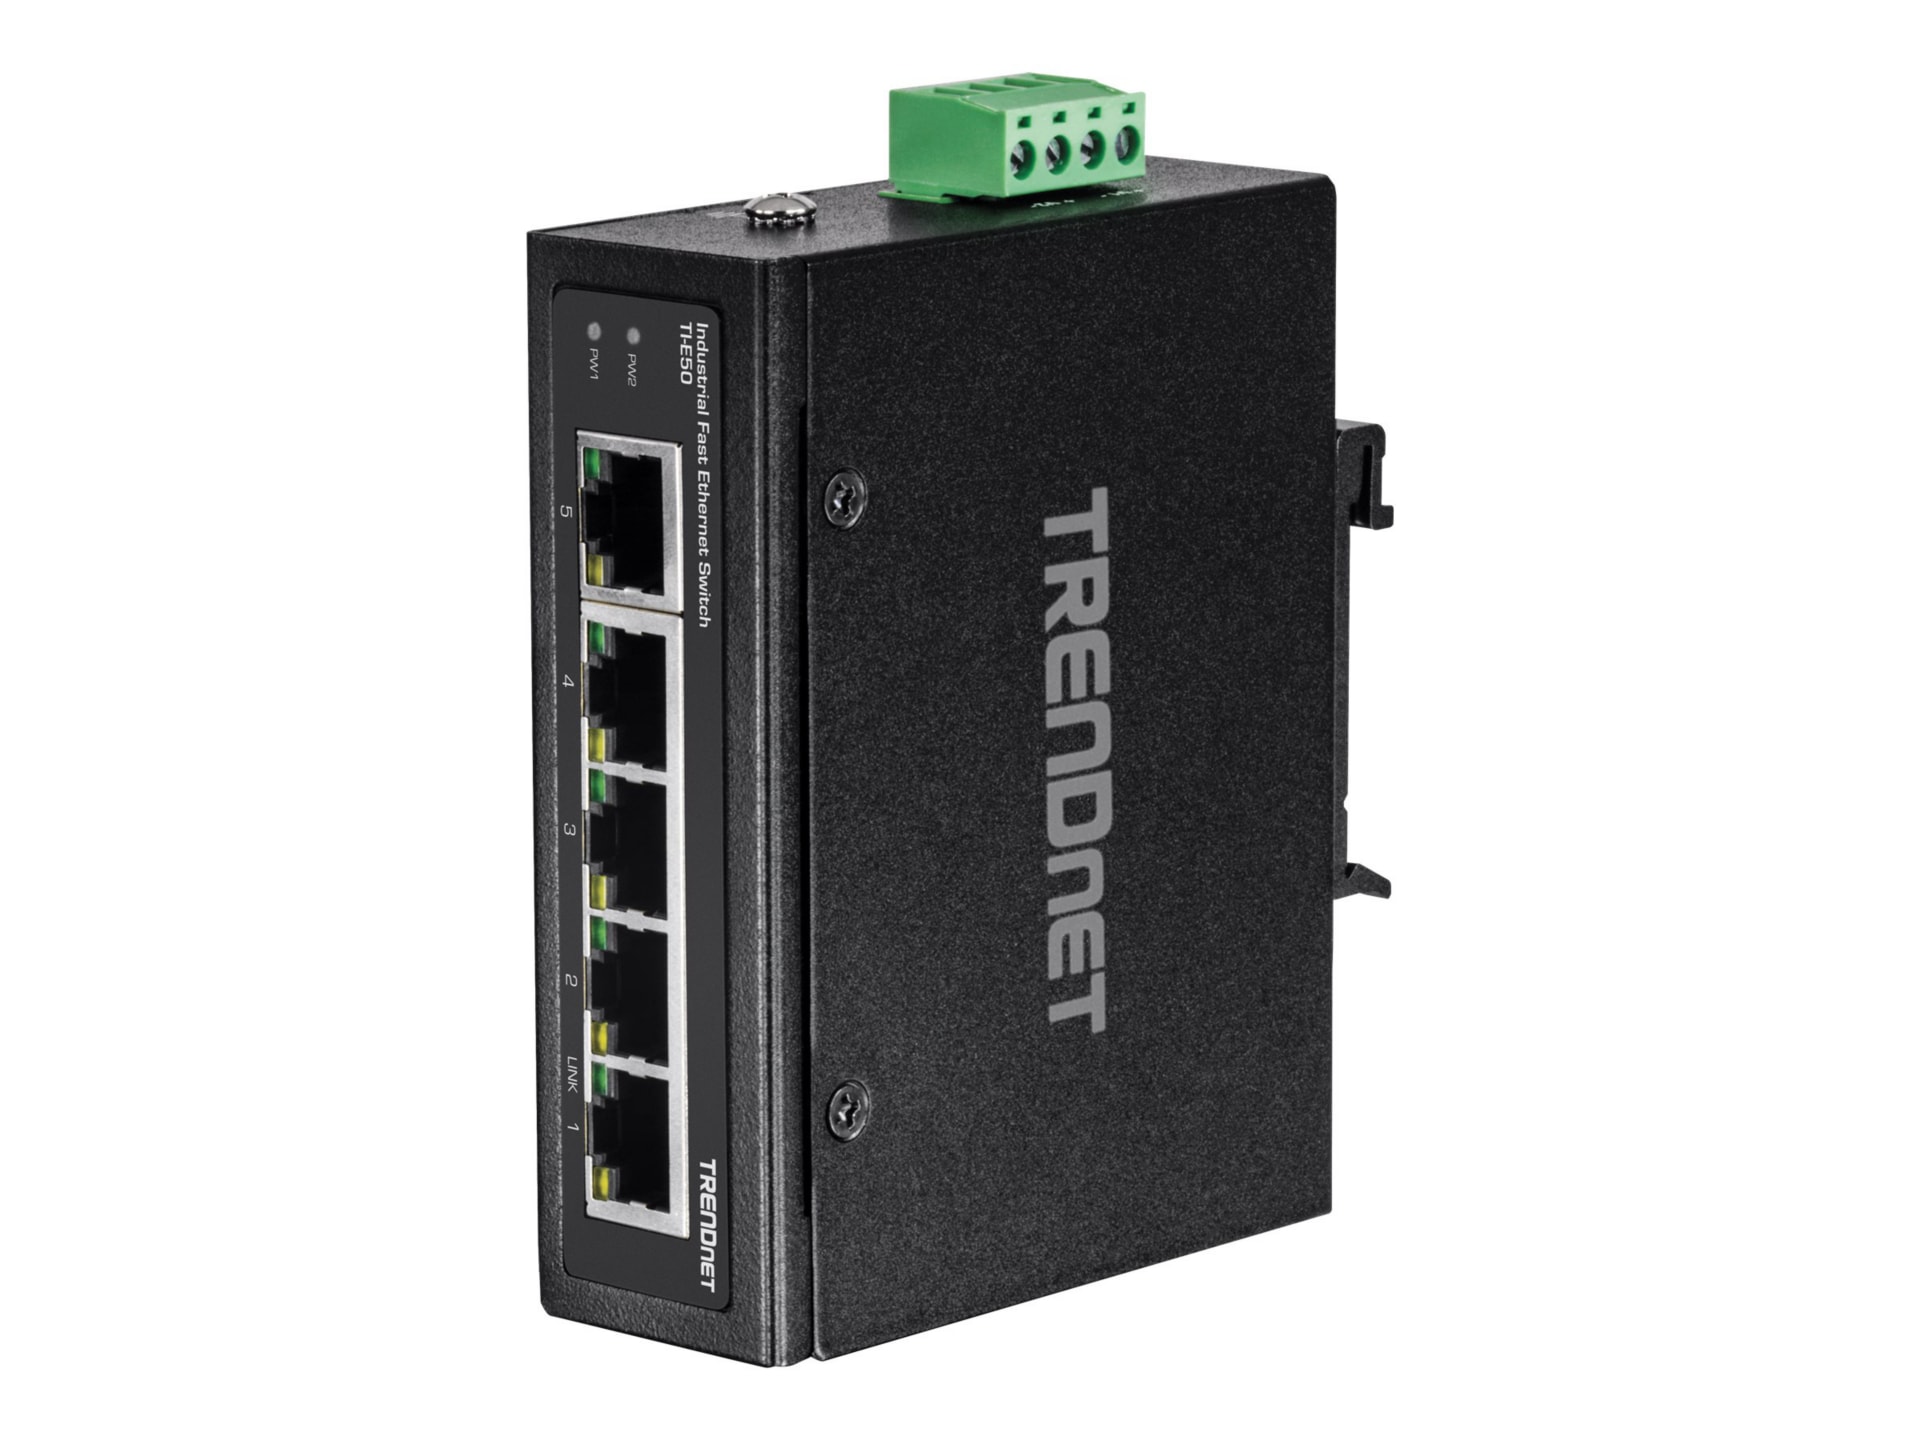 TRENDnet 5-Port Industrial Unmanaged Fast Ethernet DIN-Rail Switch, 5 x Fas